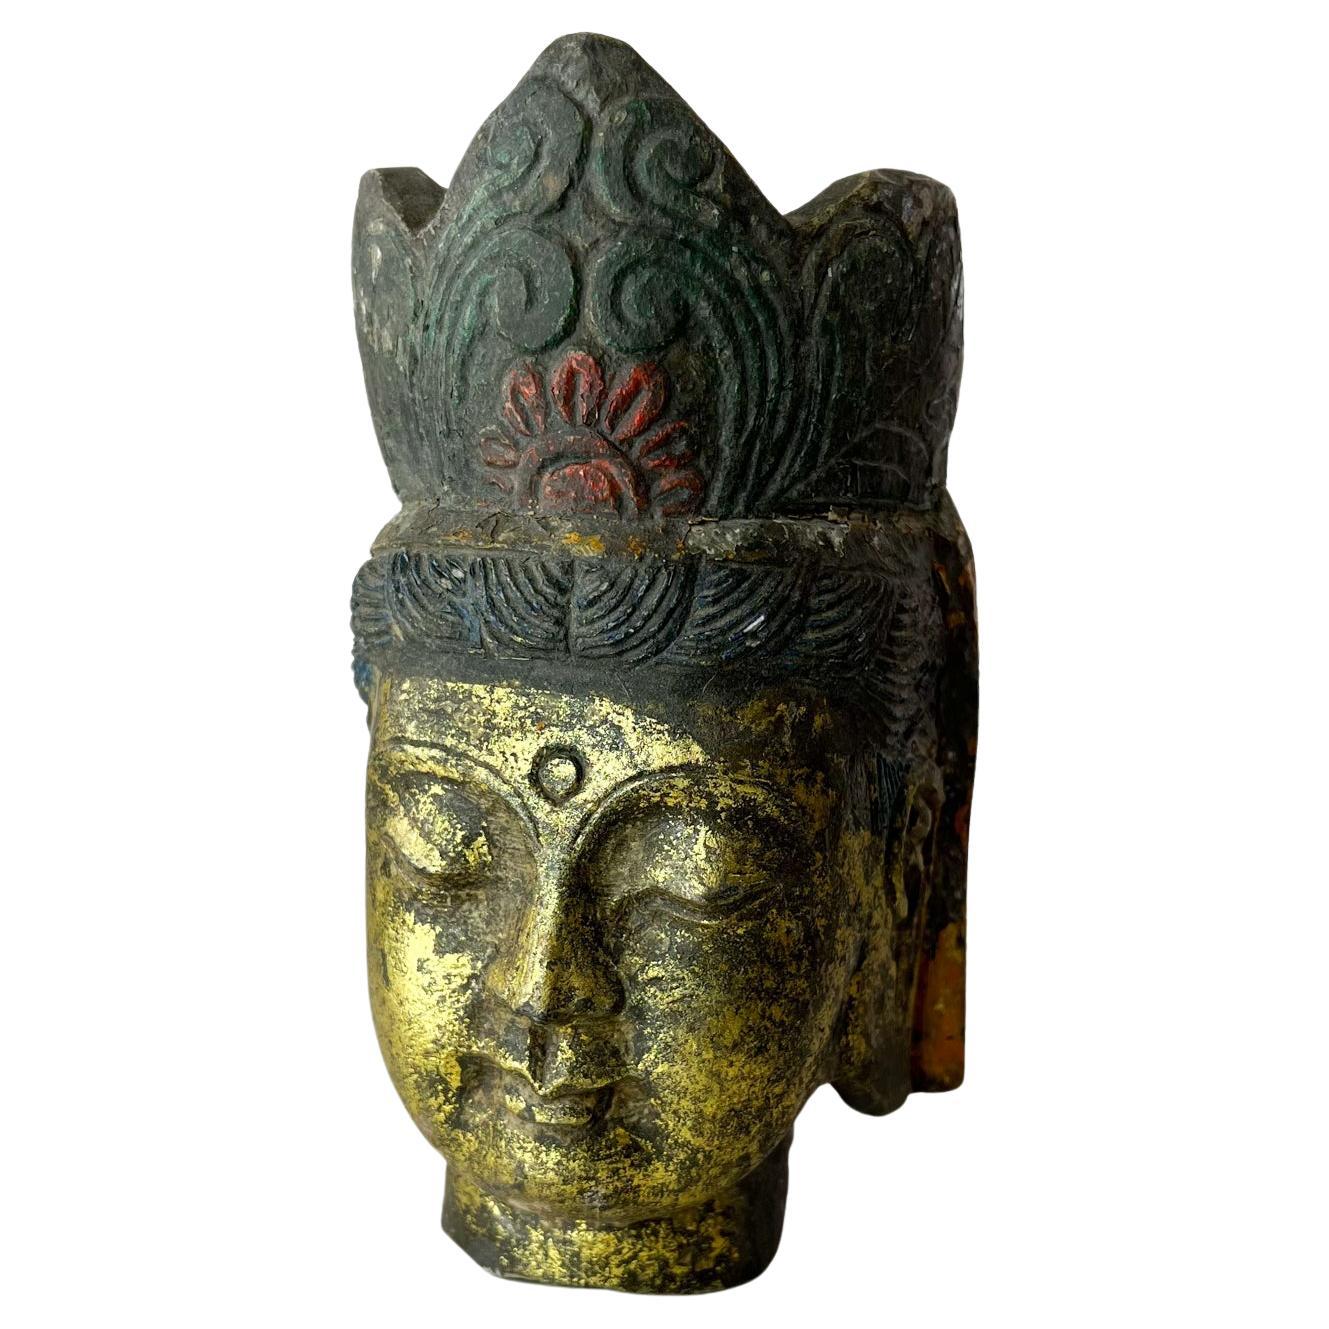 Salvaged Stone Beautiful Golden Buddha Head Sculpture Ornately Carved Crown